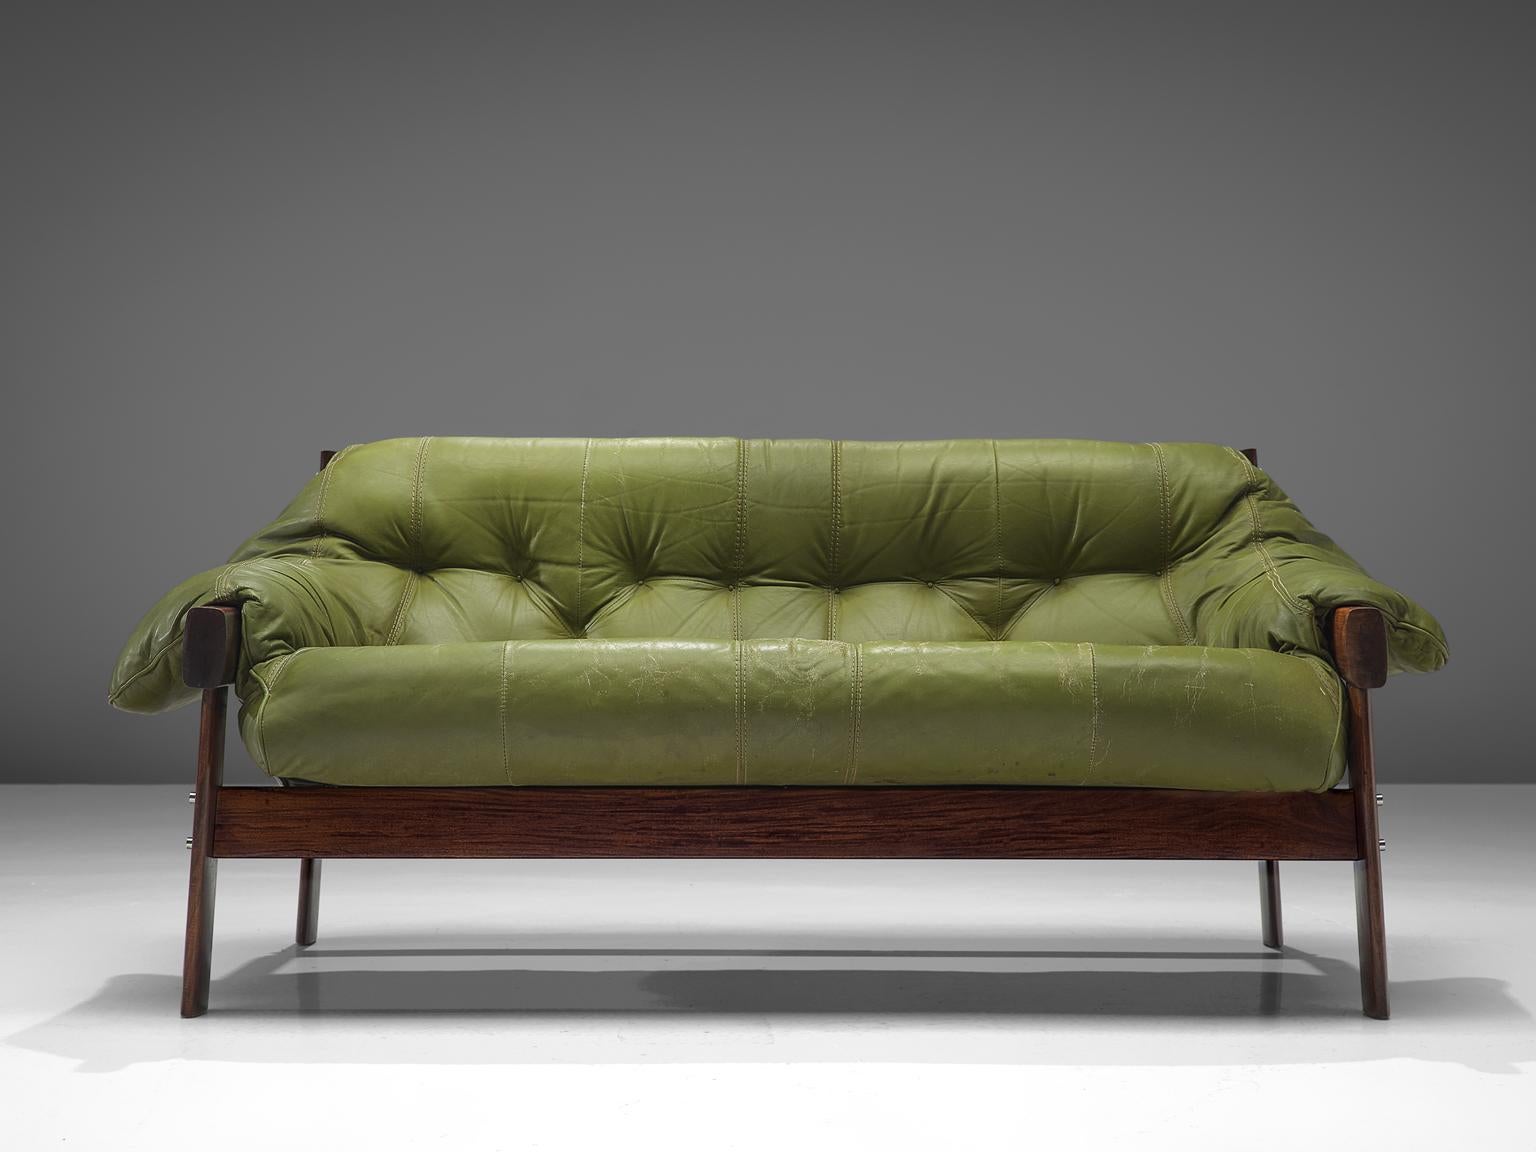 Percival Lafer, two-seat sofa leather, rosewood and metal, Brazil, late 1960s

Bulky and grand sofa by Brazilian designer Percival Lafer. This set features a solid dark wooden base with leather straps spanned between the slats. The tufted leather